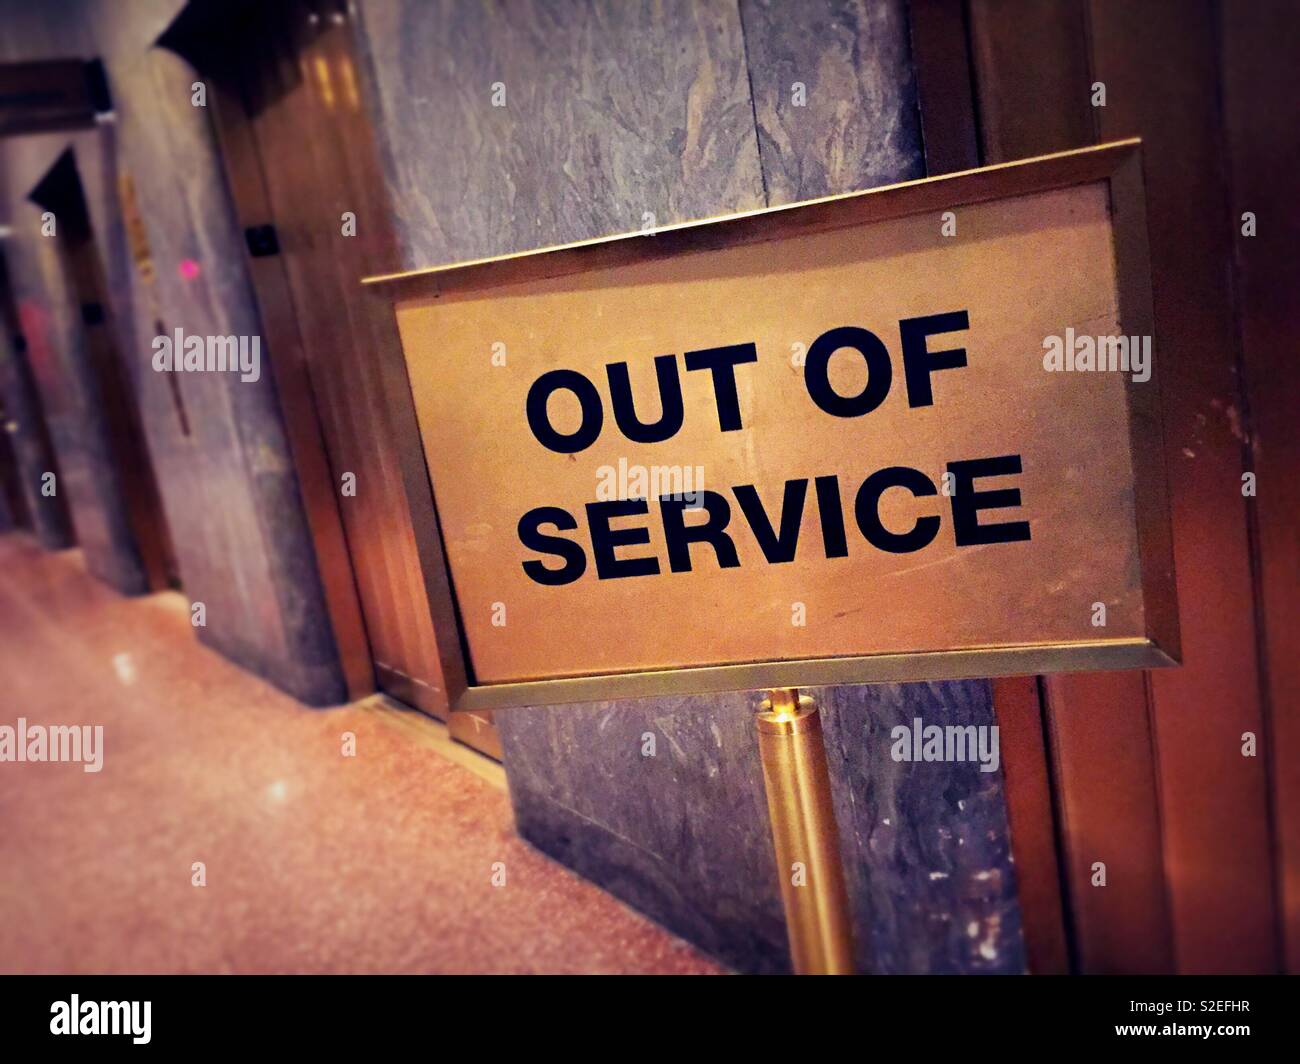 Out of service sign in front of bank of elevators, New York City, United States Stock Photo